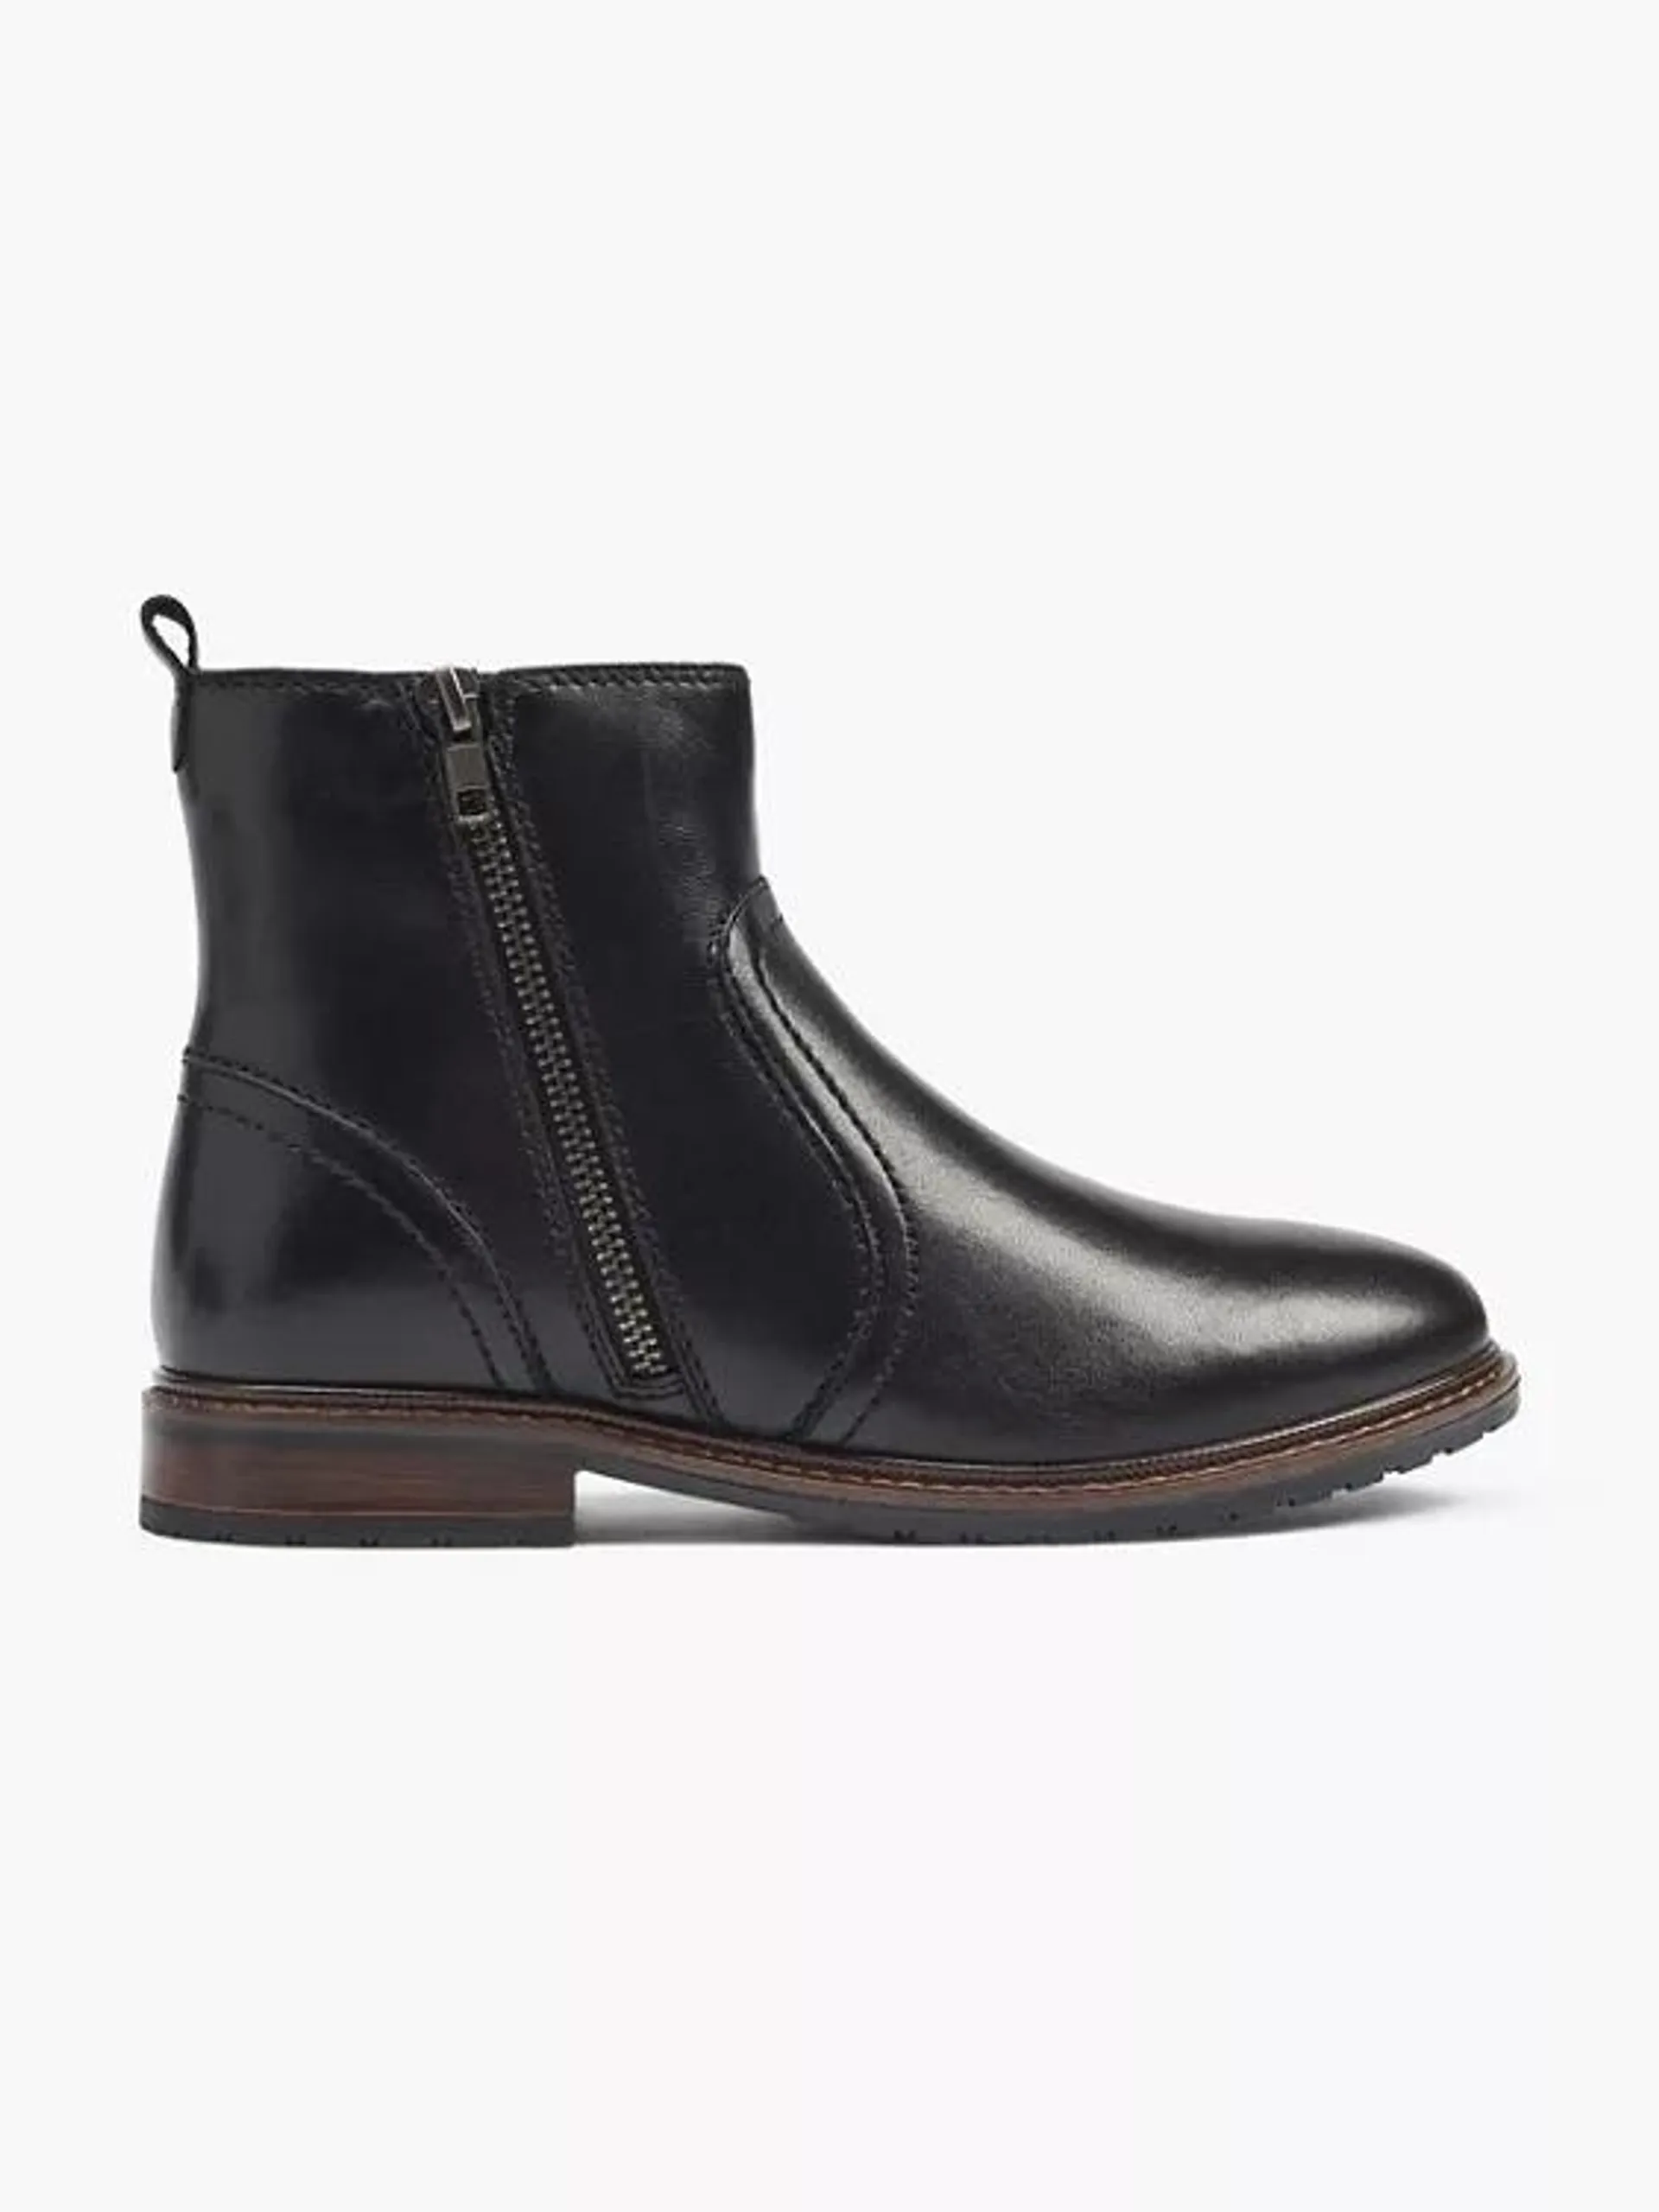 Black Leather Boot With Side Zip